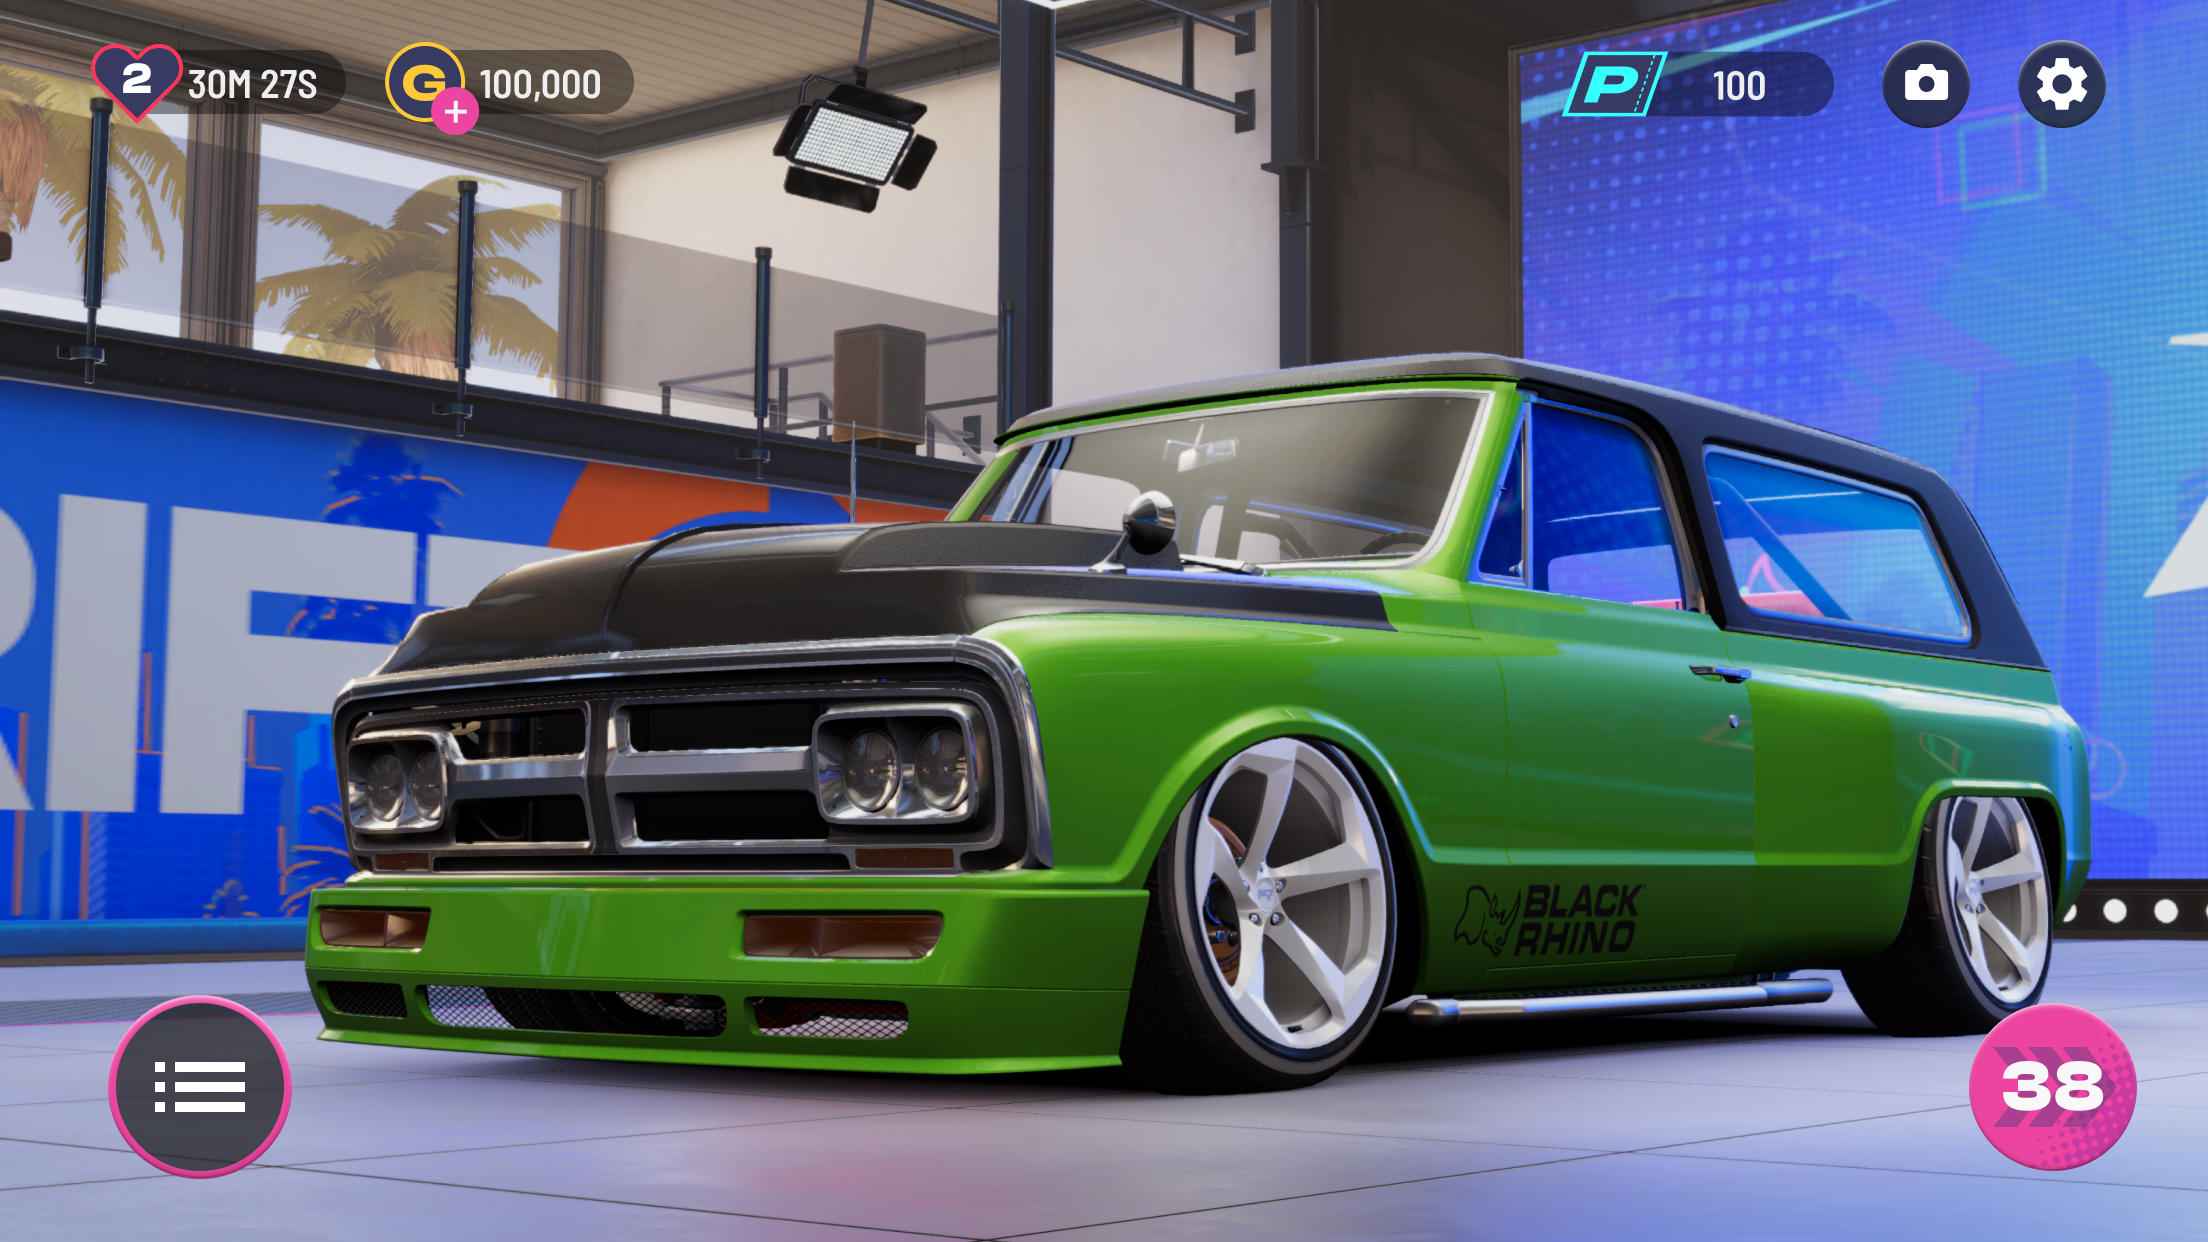 Forza Customs - Restore Cars Global Launch  Gameplay (Android/iOS) on  iPhone 15 Pro - Forza Horizon mobile 5 - Forza Horizon 5 - Forza Customs -  Restore Cars - TapTap